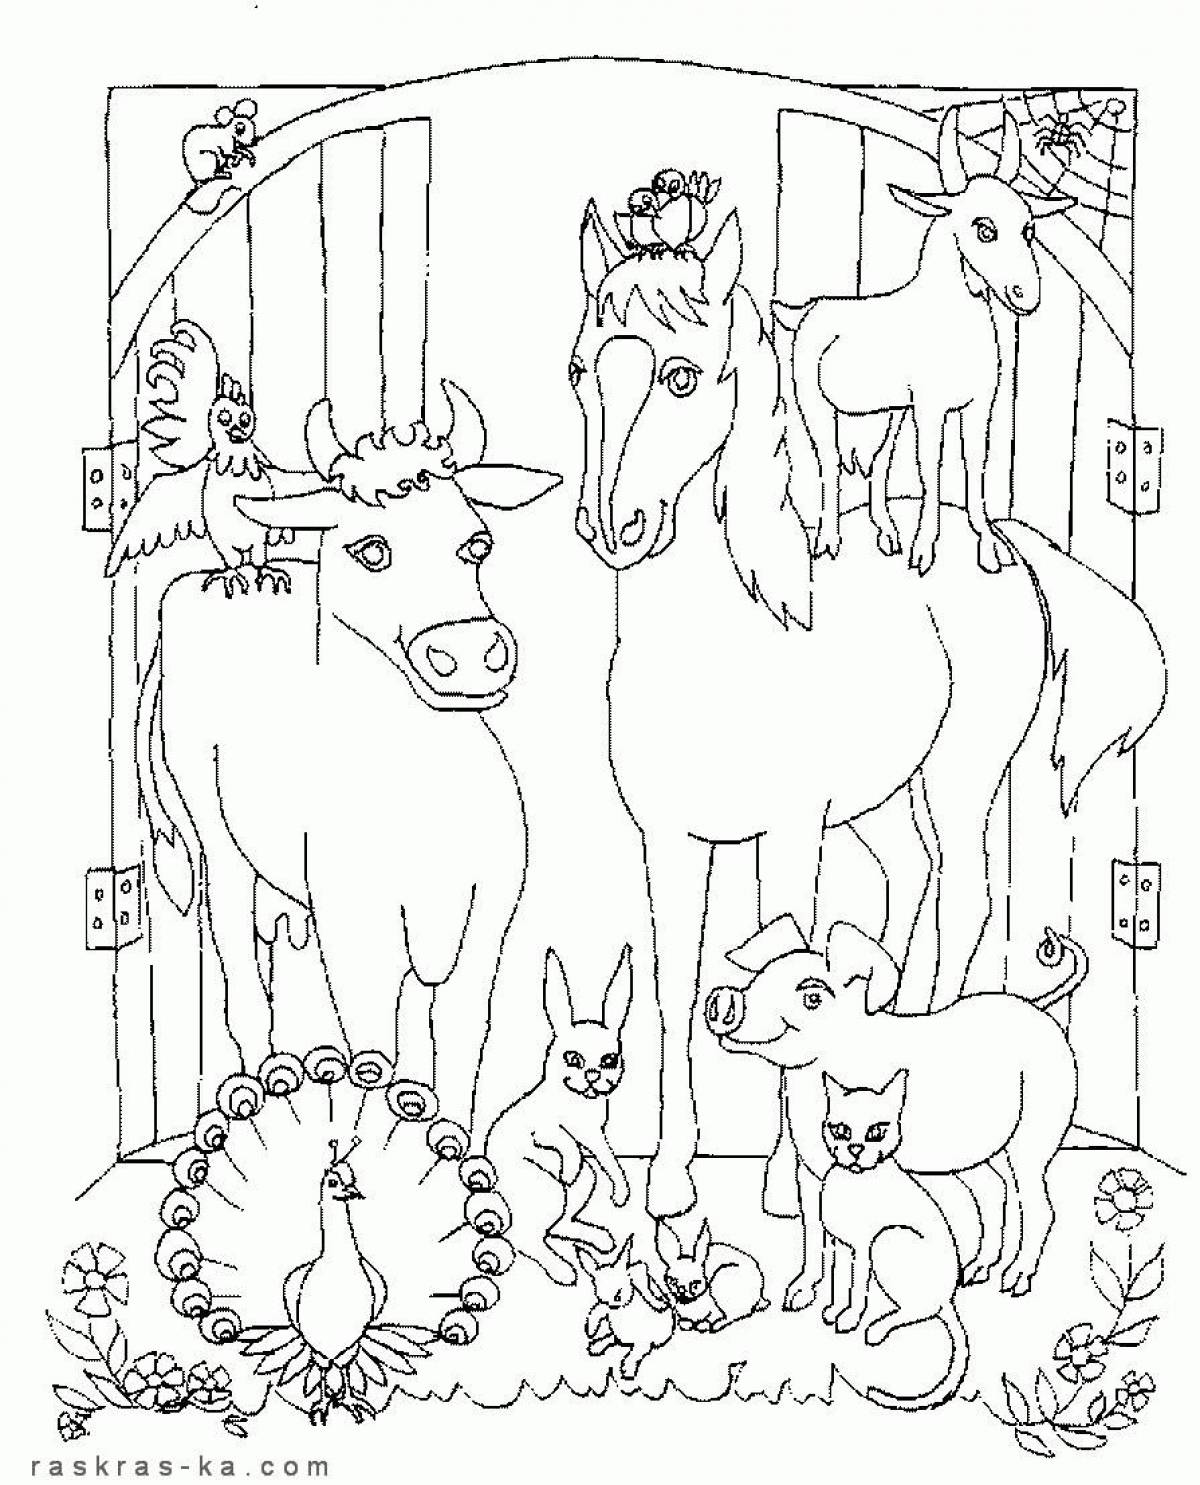 Exquisite pets coloring book for kids 5-7 years old